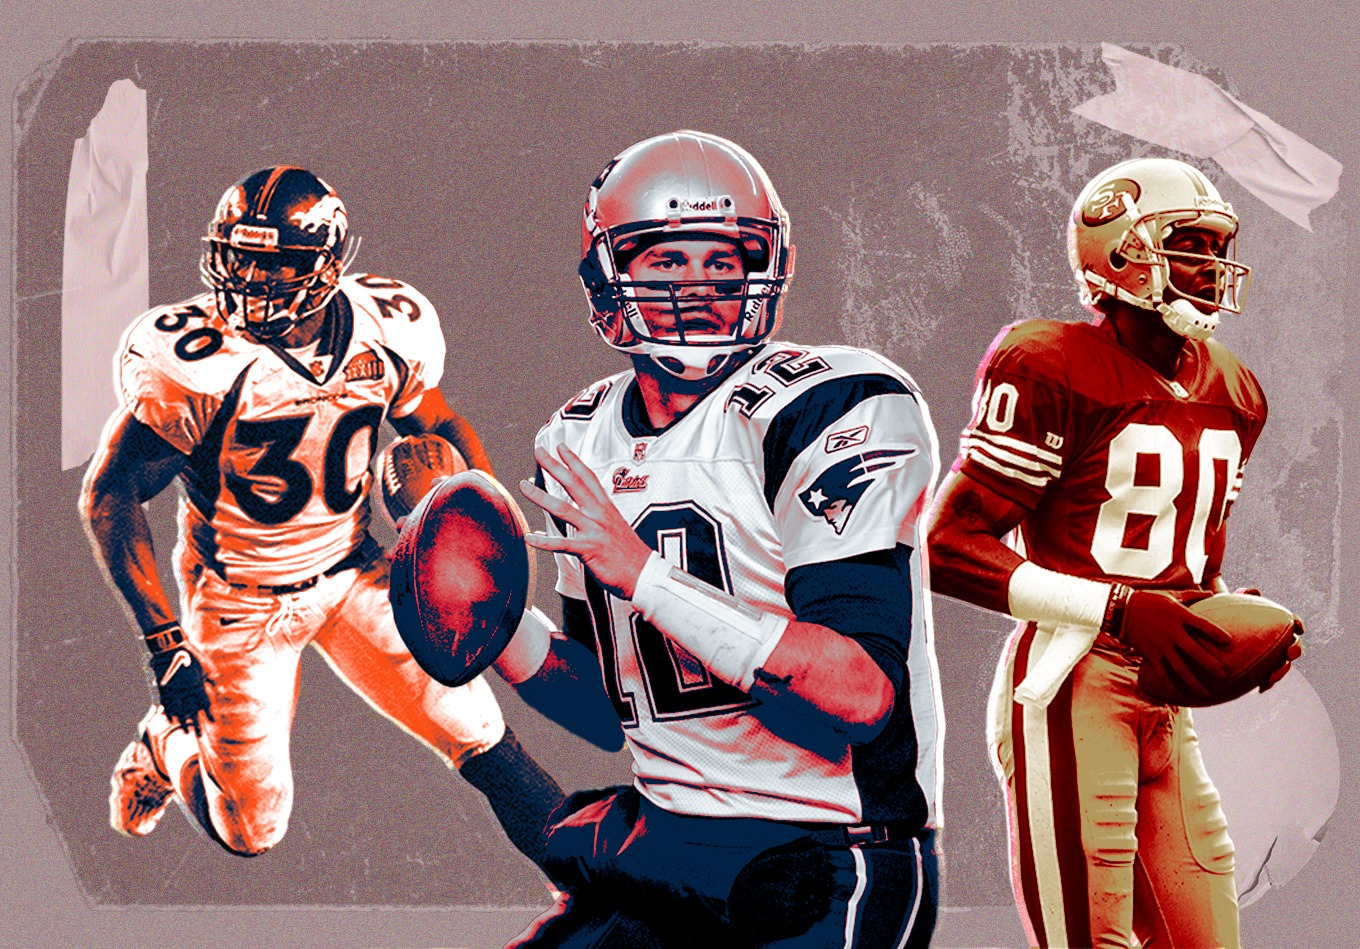 The NFL’s All-Time Super Bowl Records